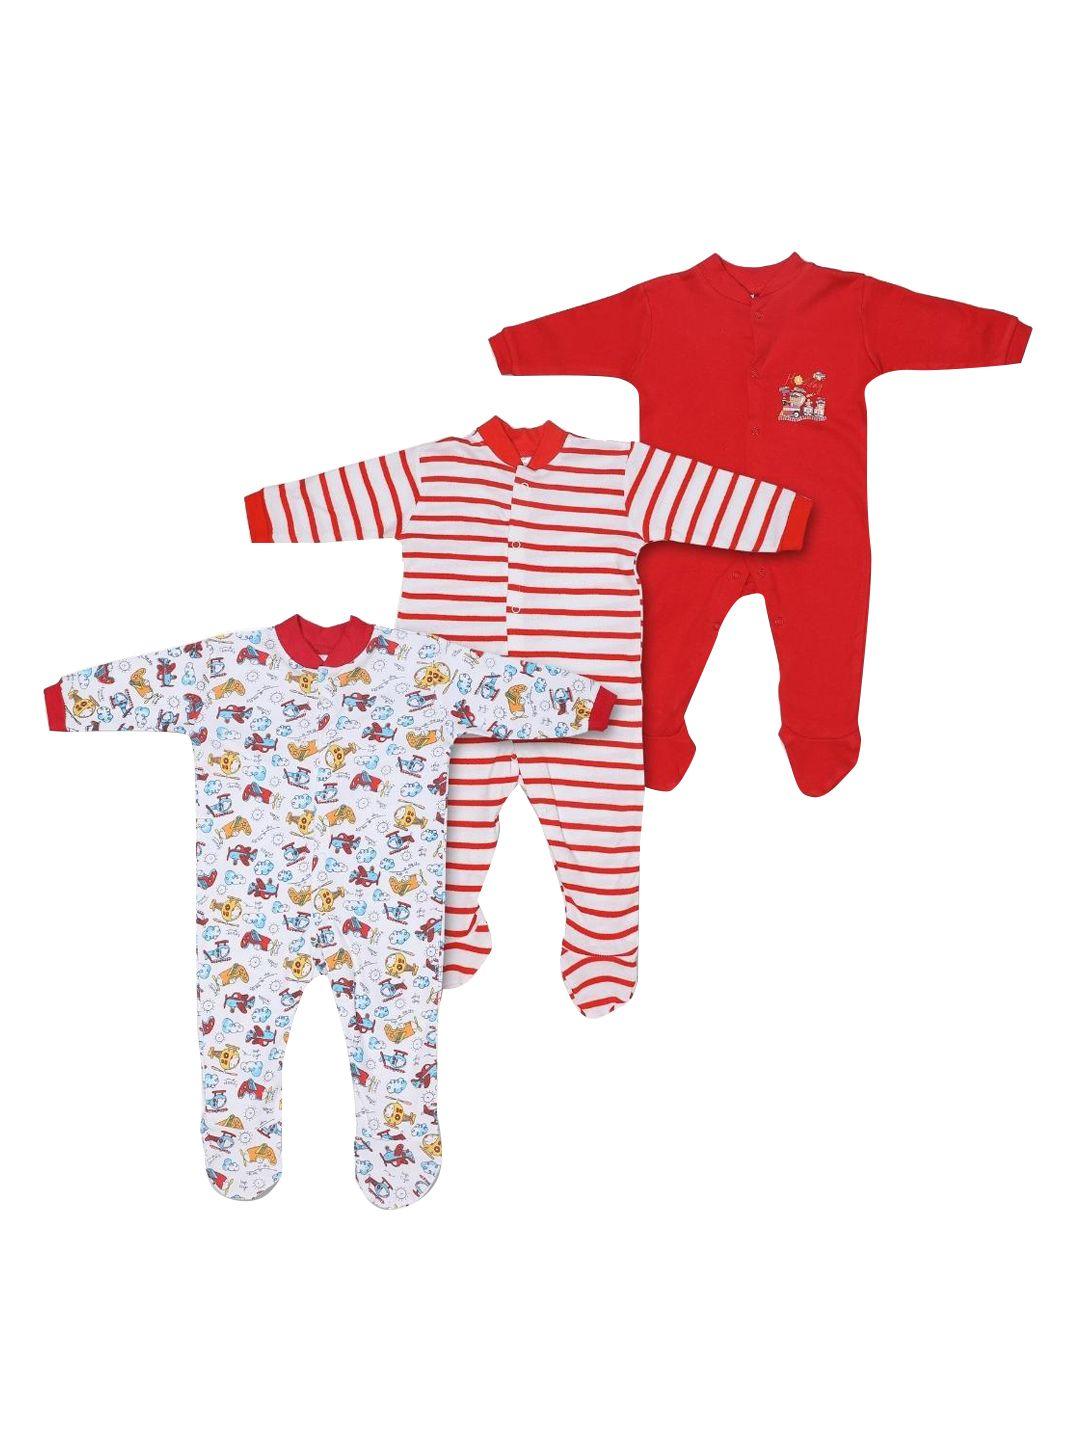 poplins set of 3 red printed cotton rompers